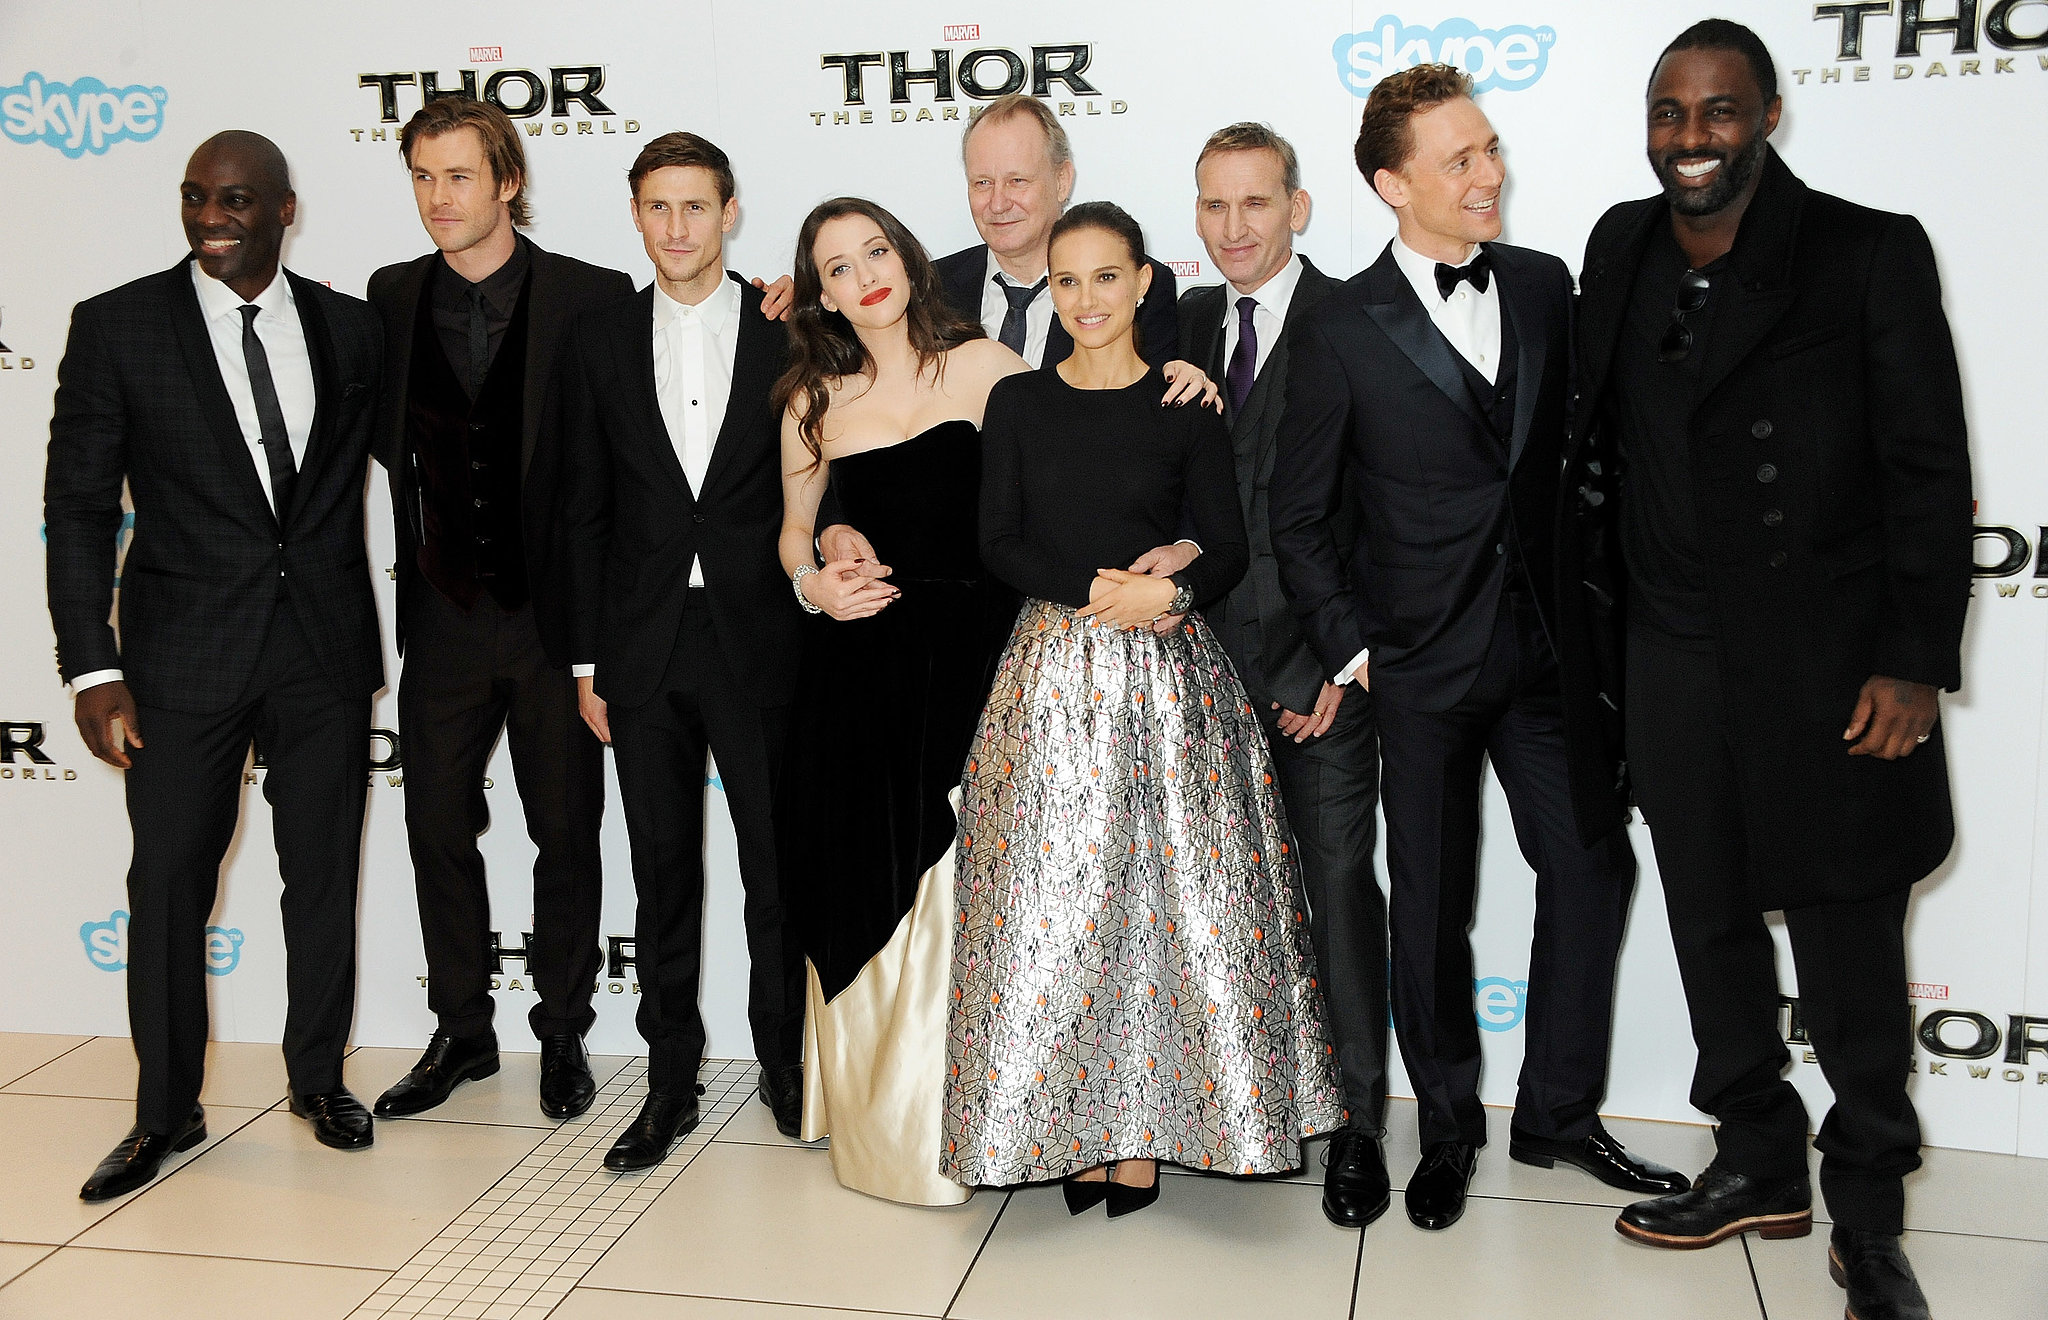 The cast of Thor: The Dark World gathered for a group photo at the